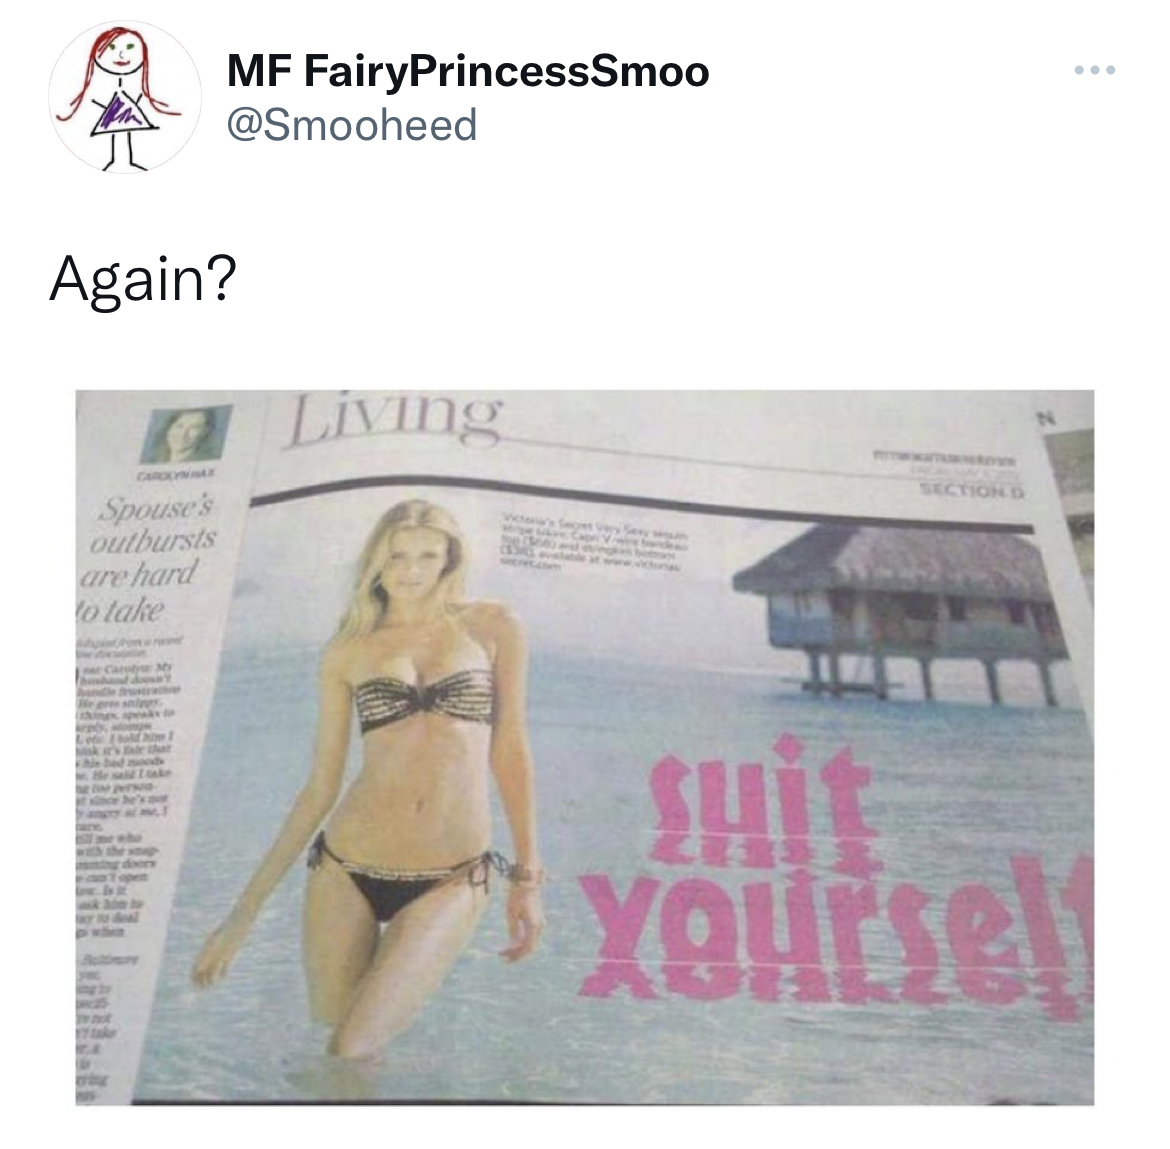 worst design fails - Mf FairyPrincessSmoo Again? Spouse's outbursts are hard to take Living yoursel